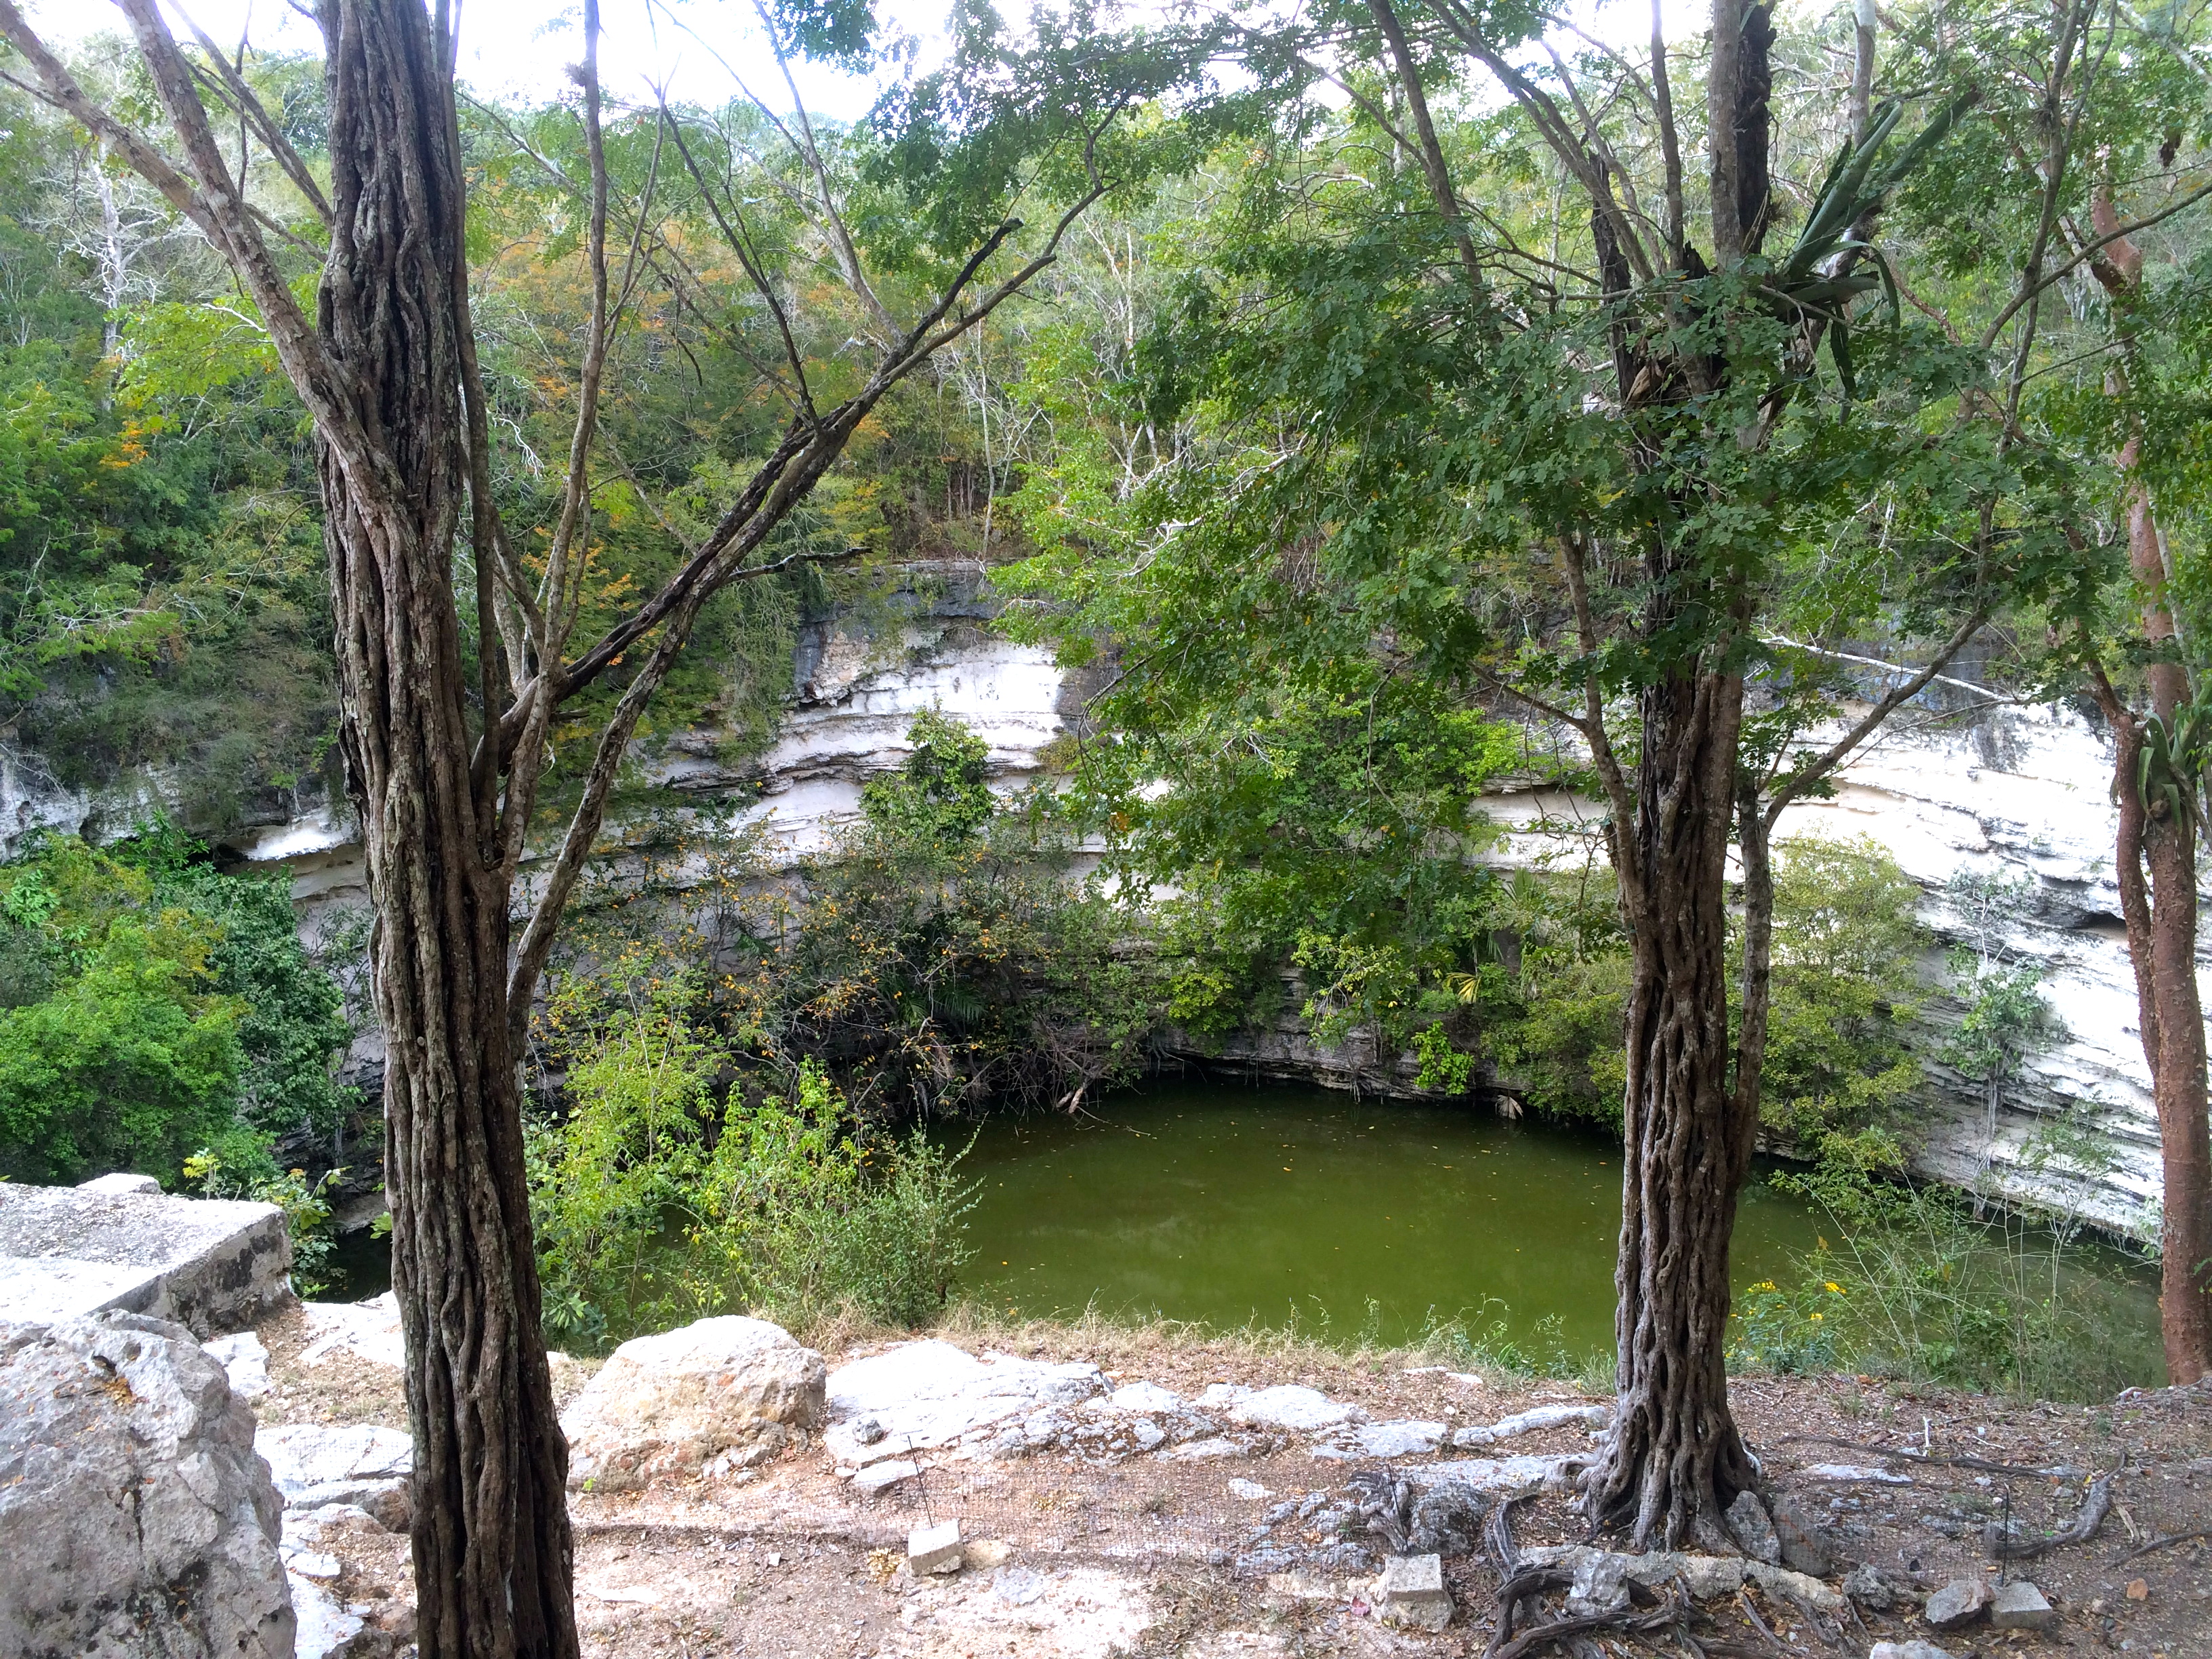 The sacred cenote where the children would be sacrificed.